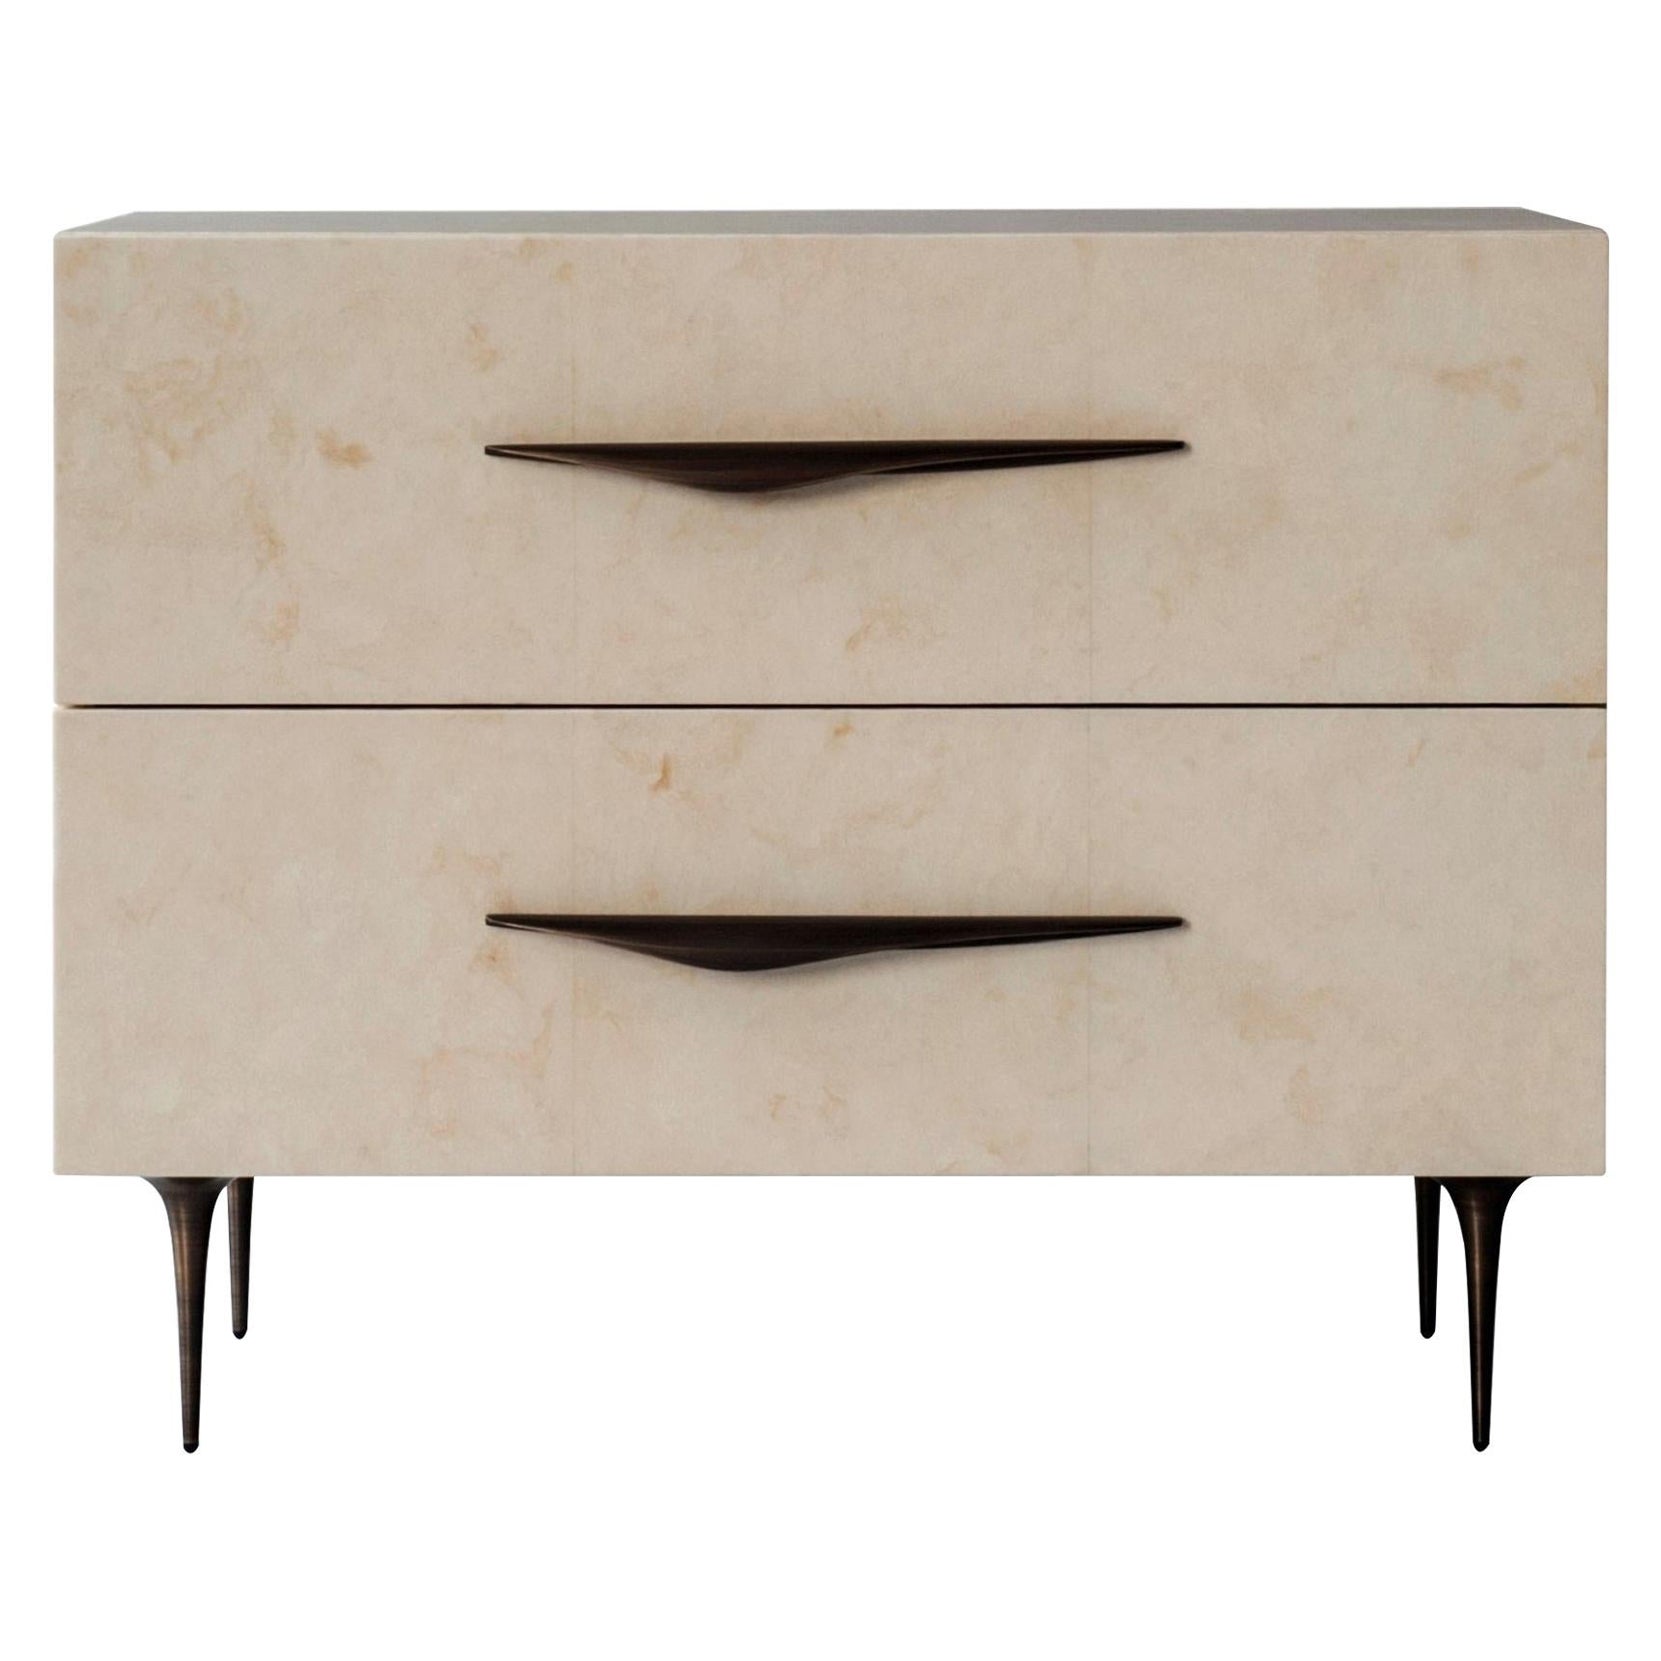 Antwerp Bedside Tables by DeMuro Das with Solid Antique Bronze Handles and Legs